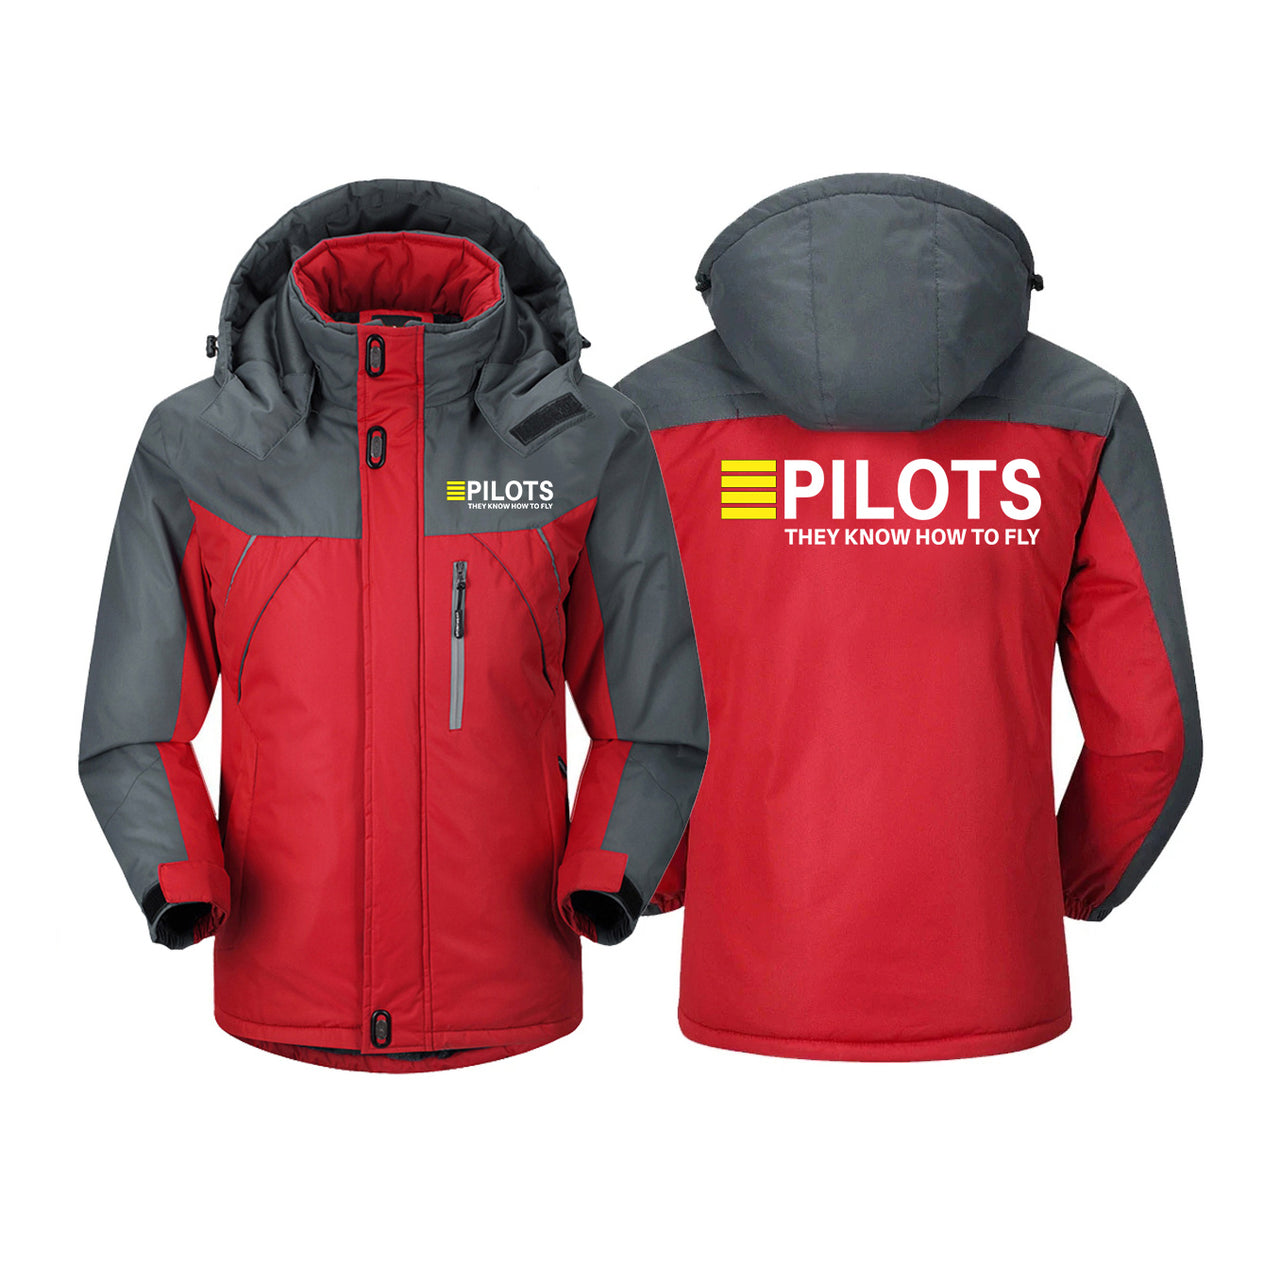 Pilots They Know How To Fly Designed Thick Winter Jackets